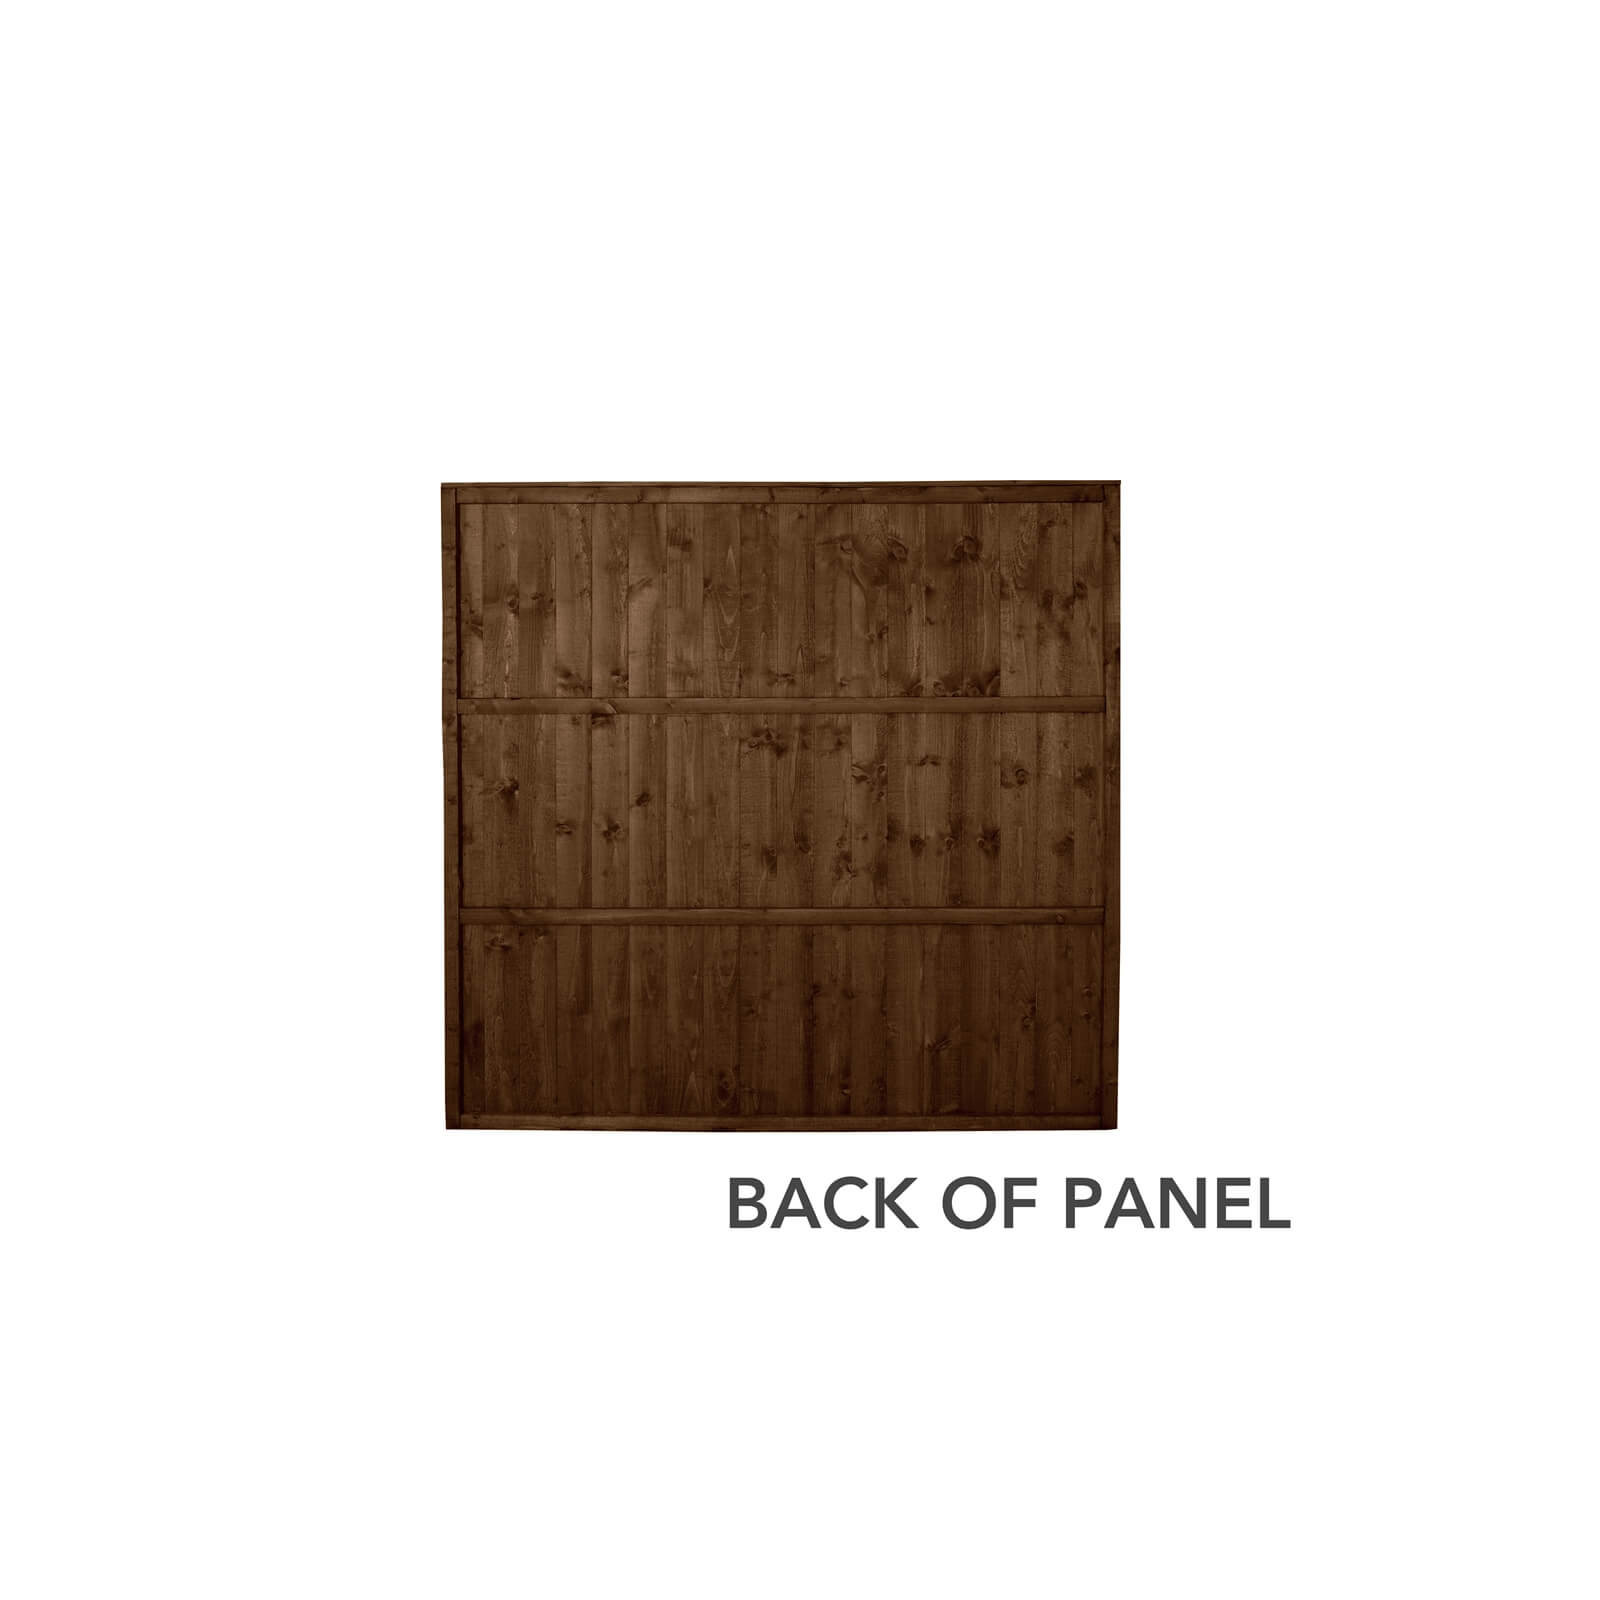 6ft x 6ft (1.83m x 1.85m) Pressure Treated Featheredge Fence Panel (Dark Brown) - Pack of 4